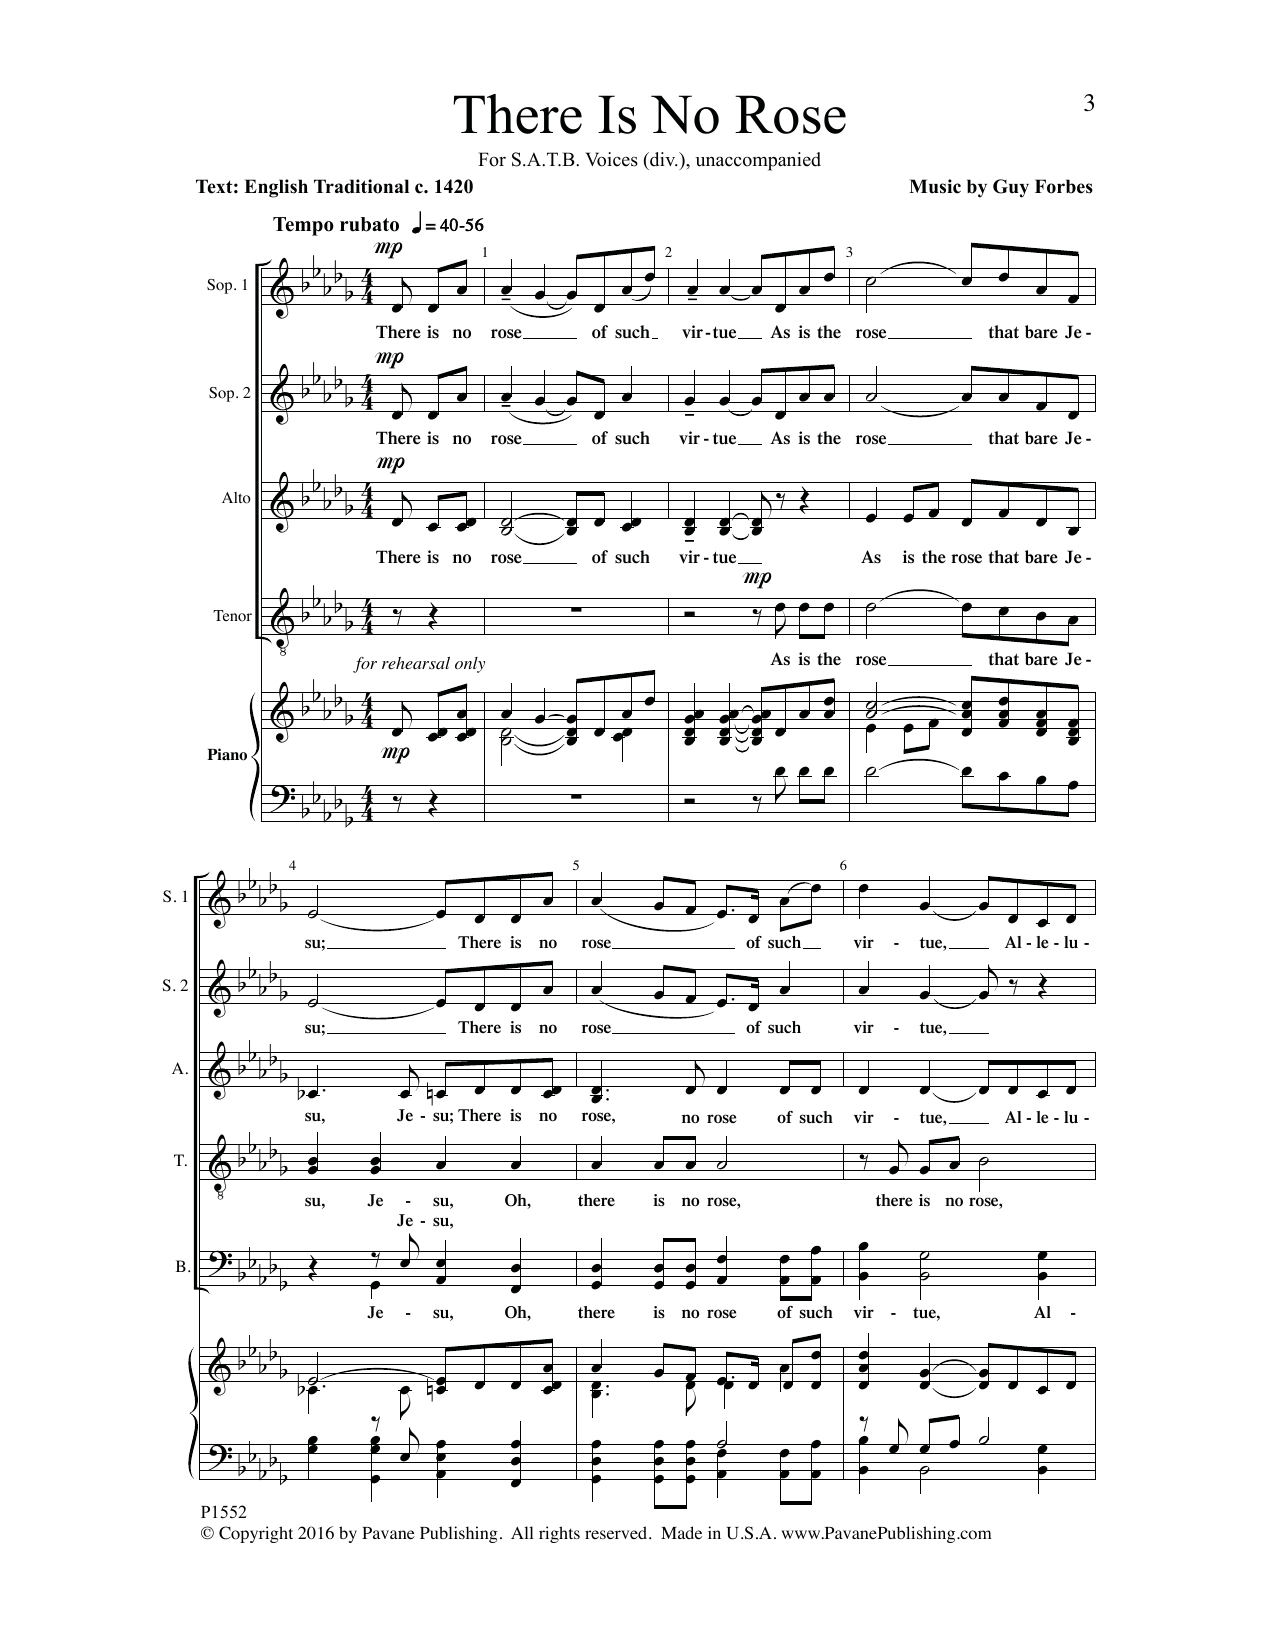 Download Guy Forbes There Is No Rose Sheet Music